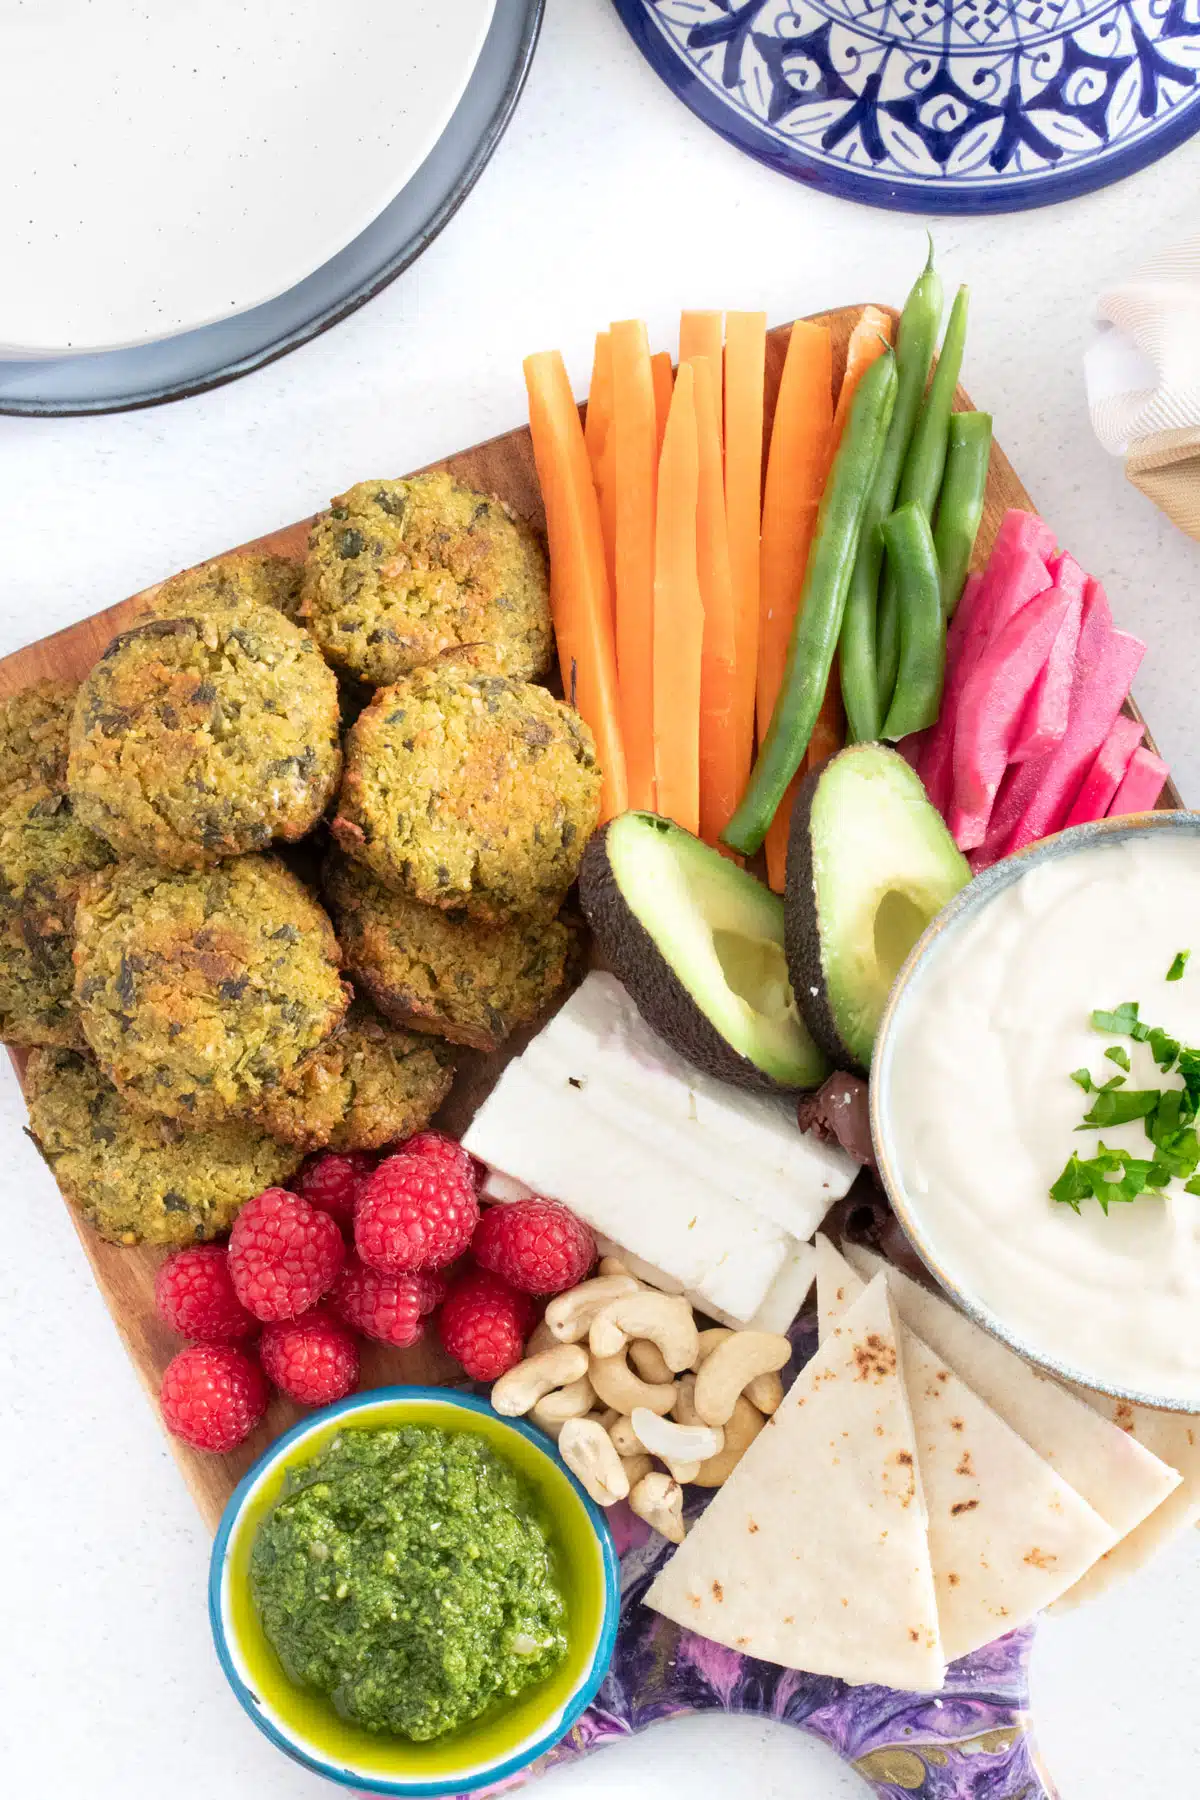 A mezze platter filled with baked falafel, berries, nuts, pita bread, dips, avocado, cut vegetables, pickles, and cheese.